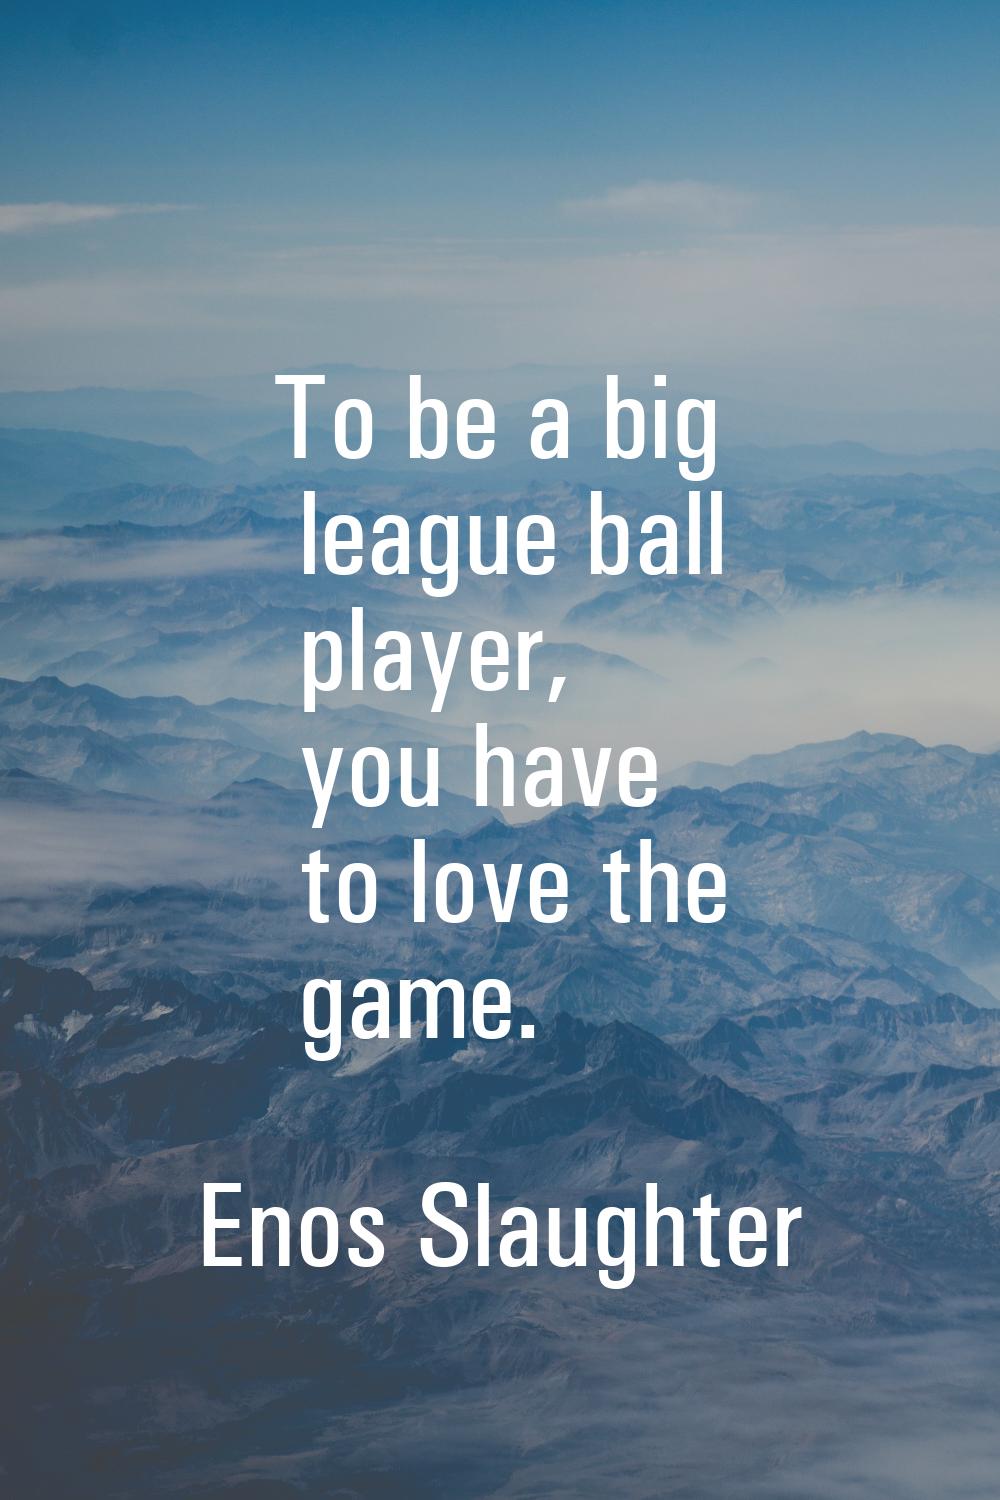 To be a big league ball player, you have to love the game.